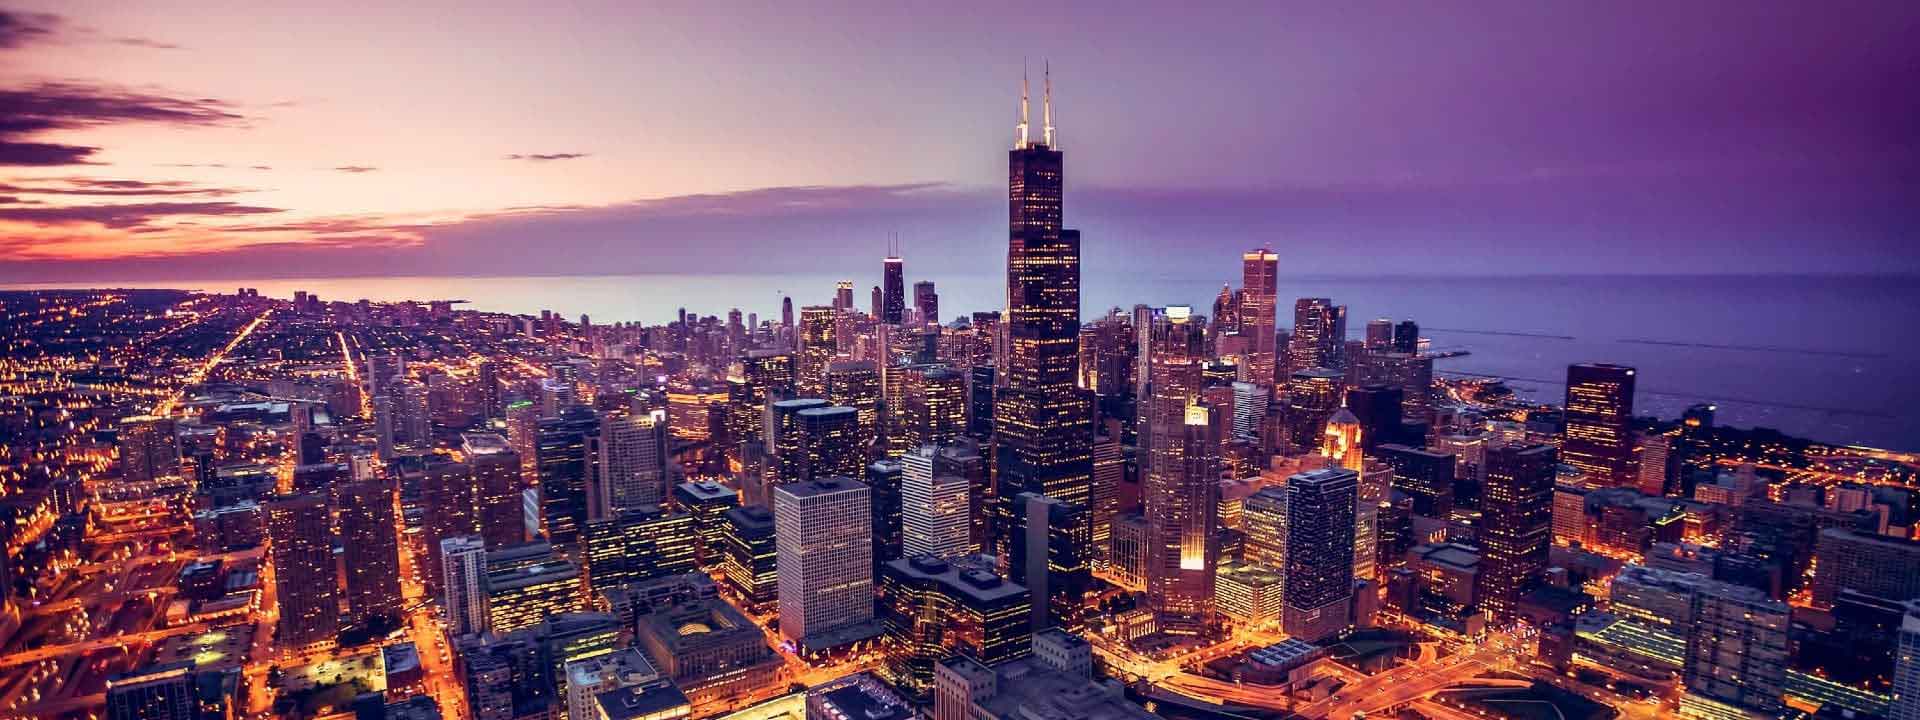 Aerial view of Chicago at night